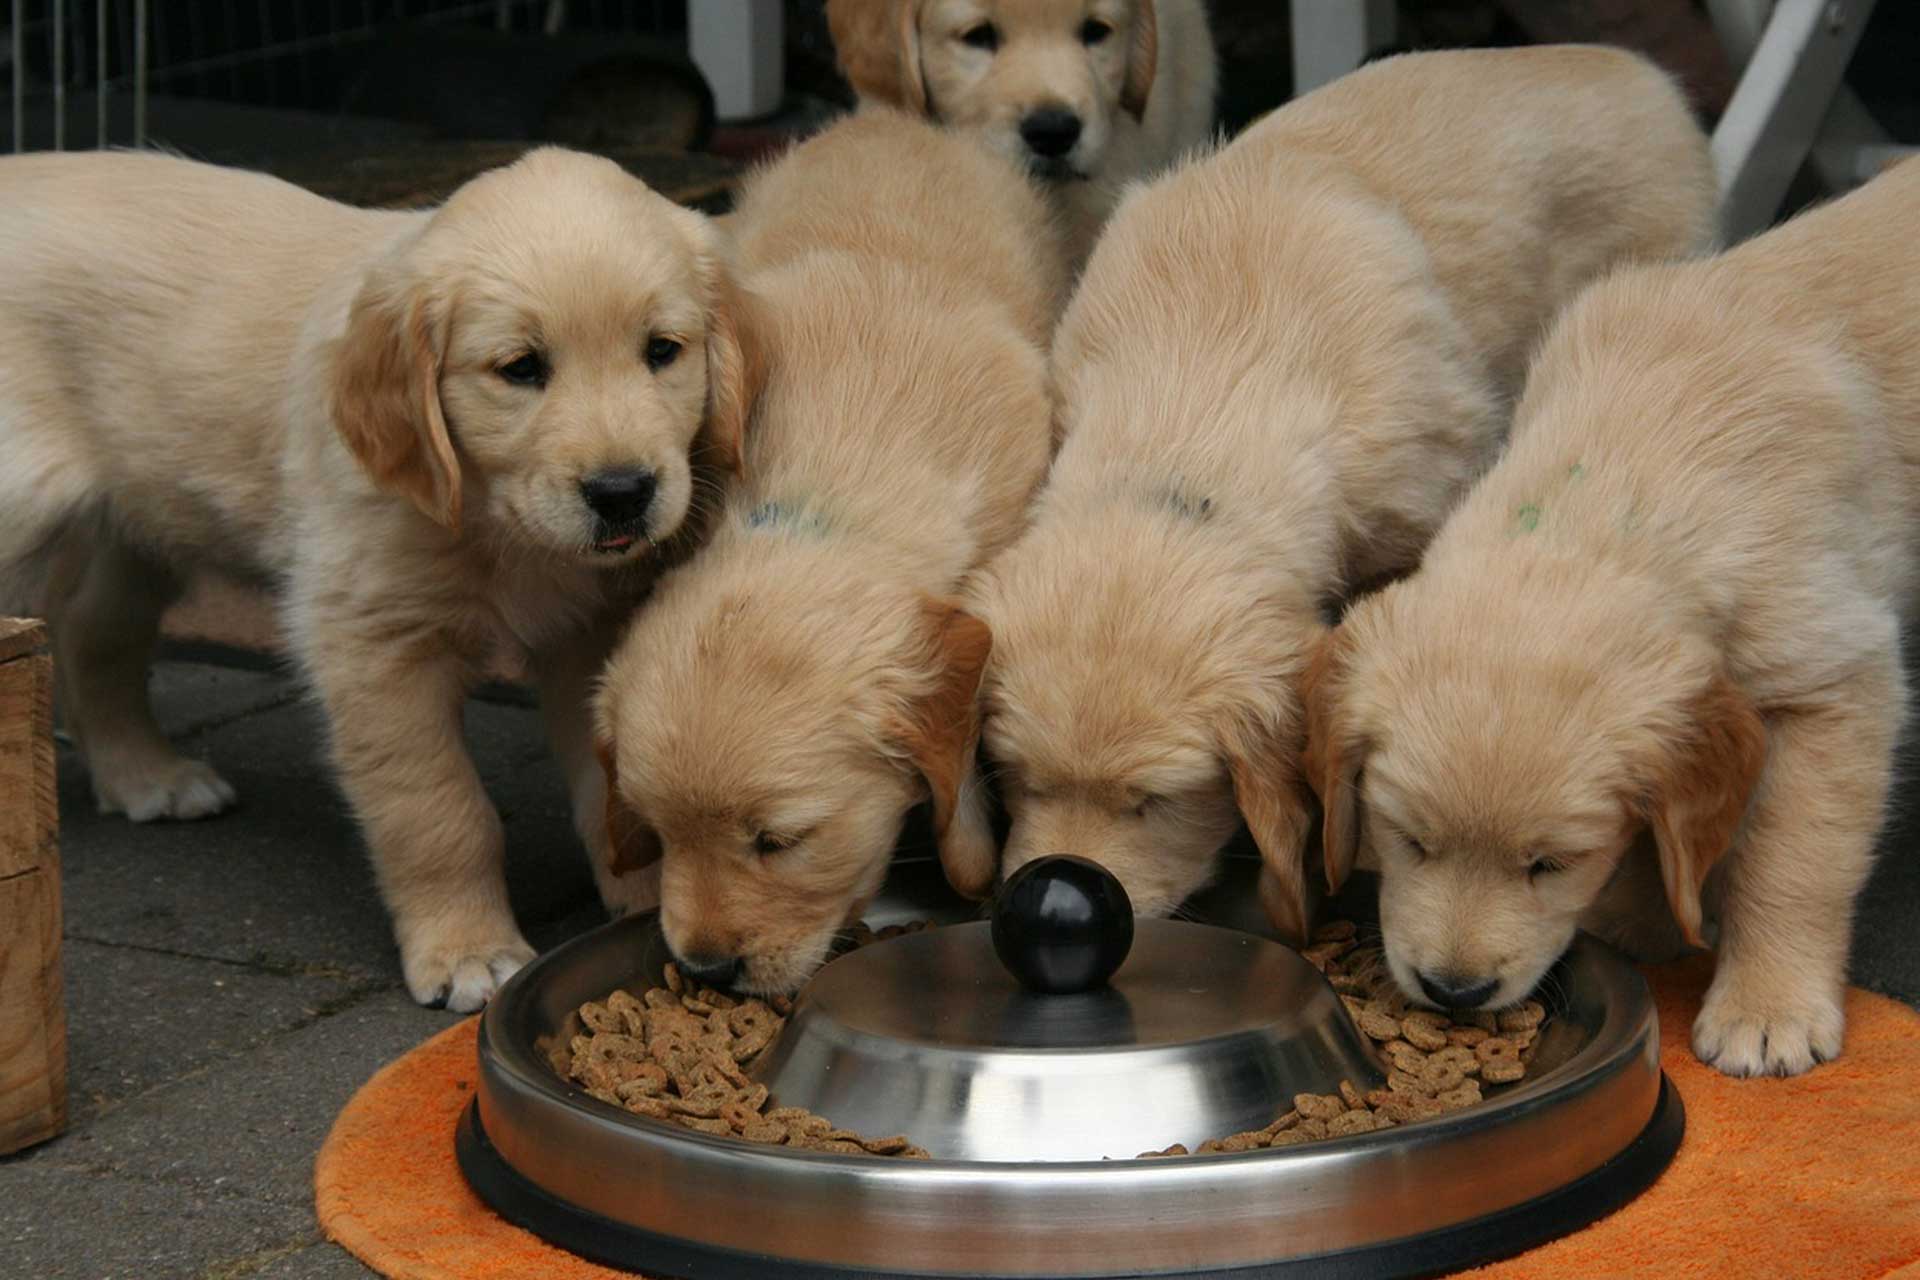 Joyful puppies enjoying a meal inside the crate associating it with happiness and comfort